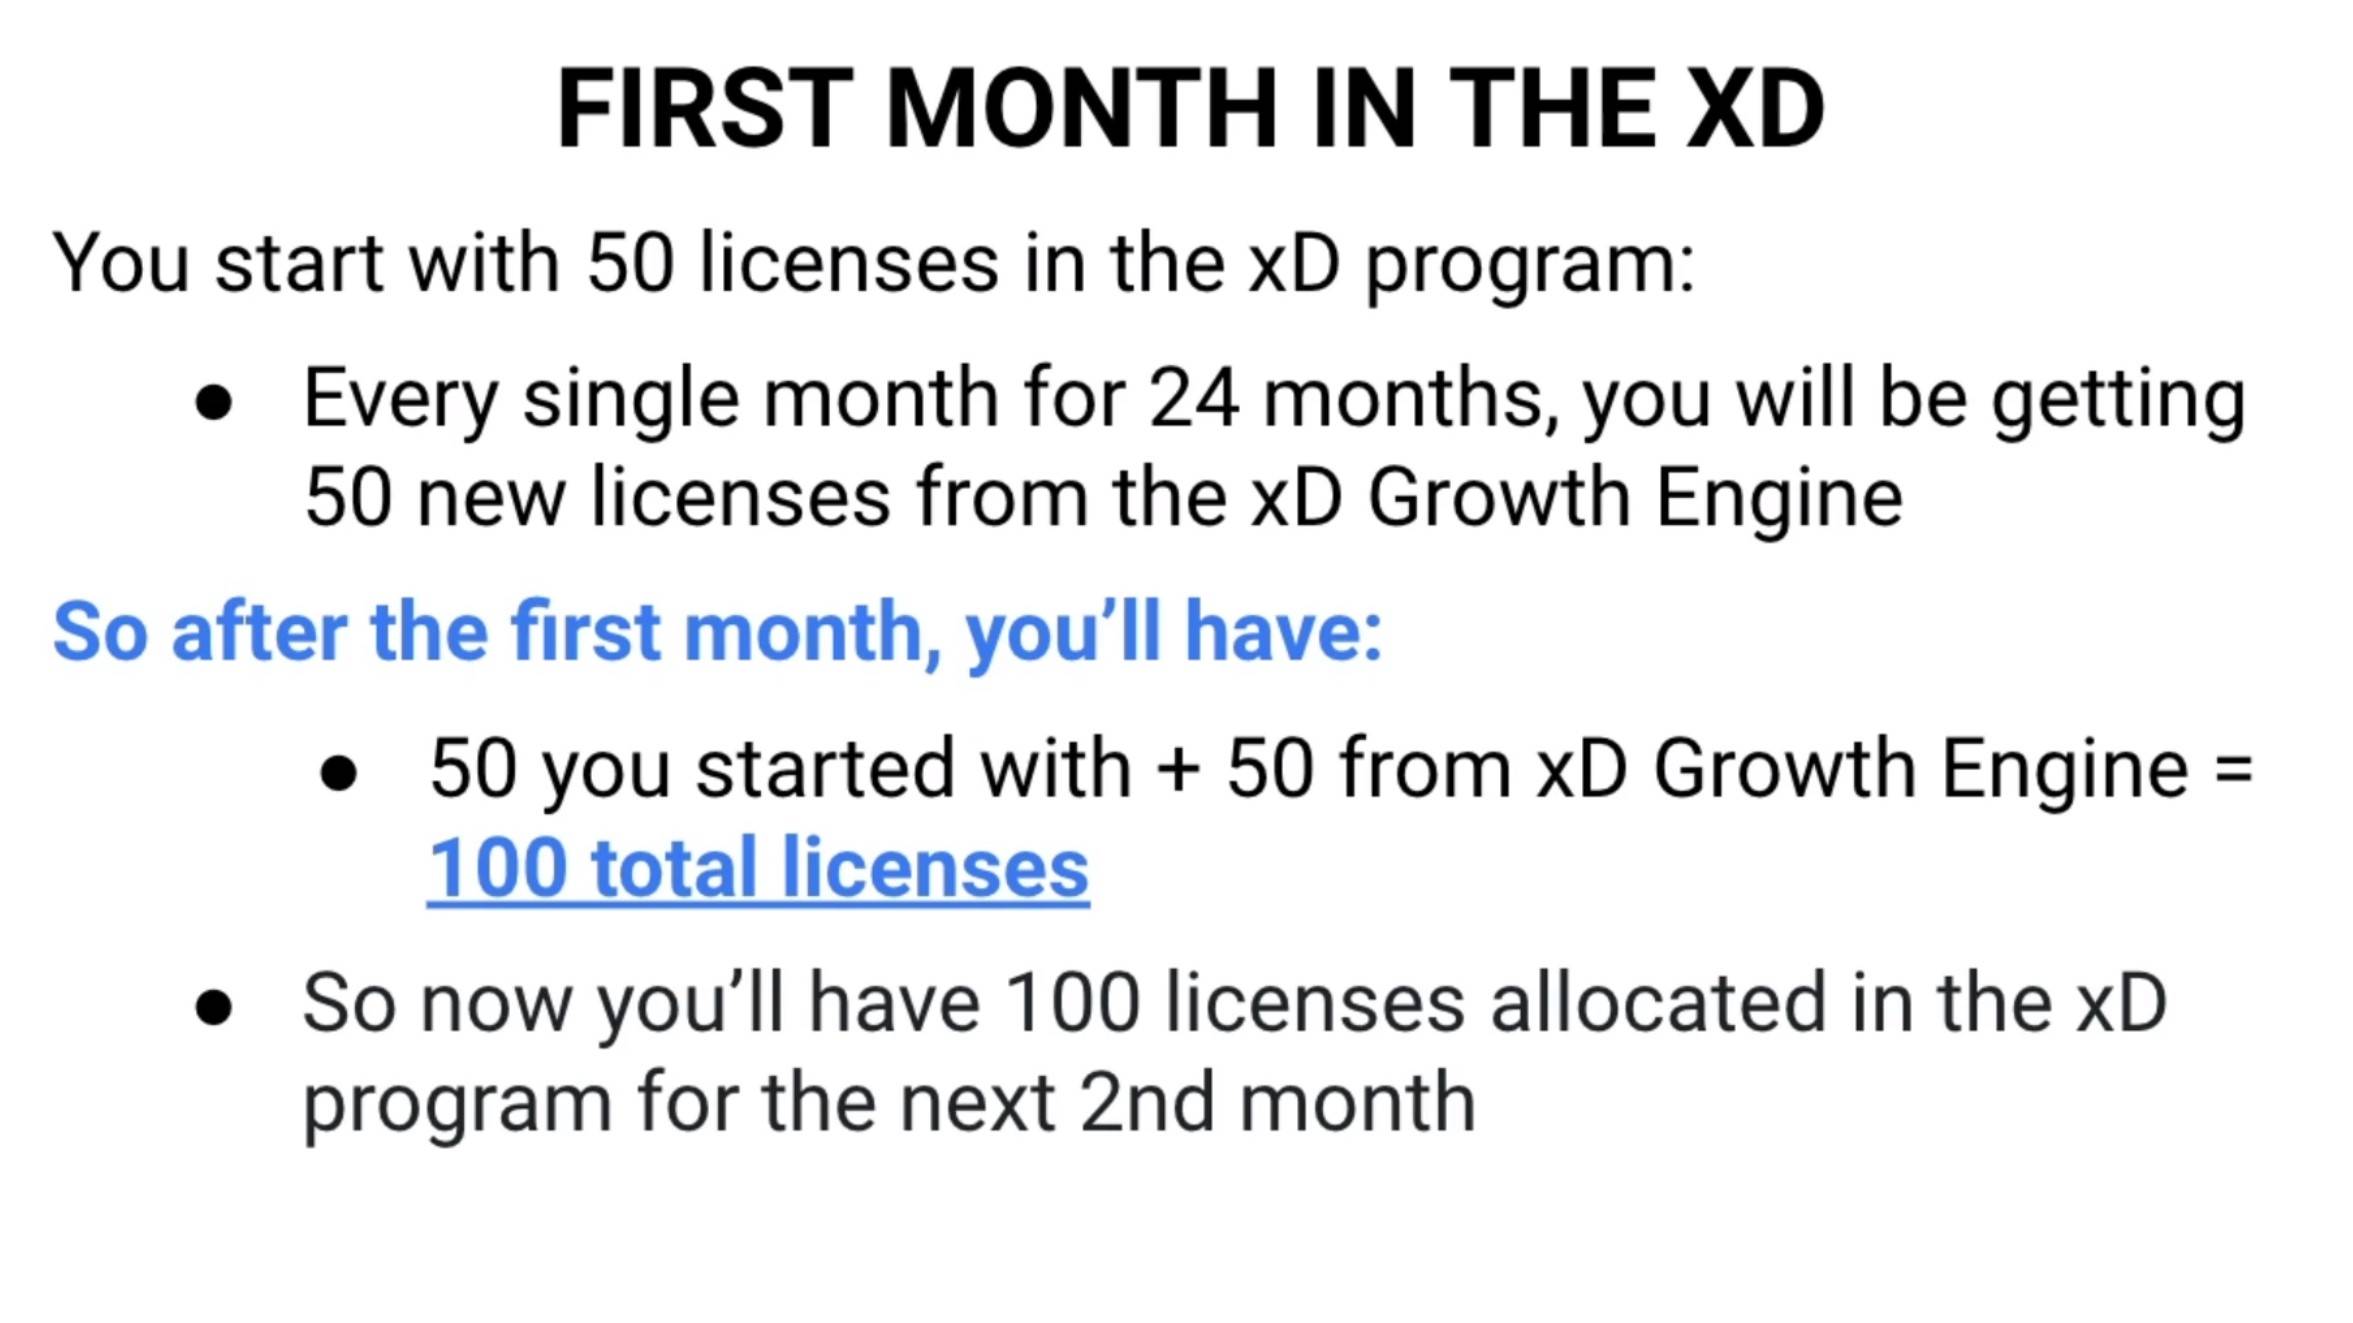 Start with 50 Licences and get 50 more next month from xD.